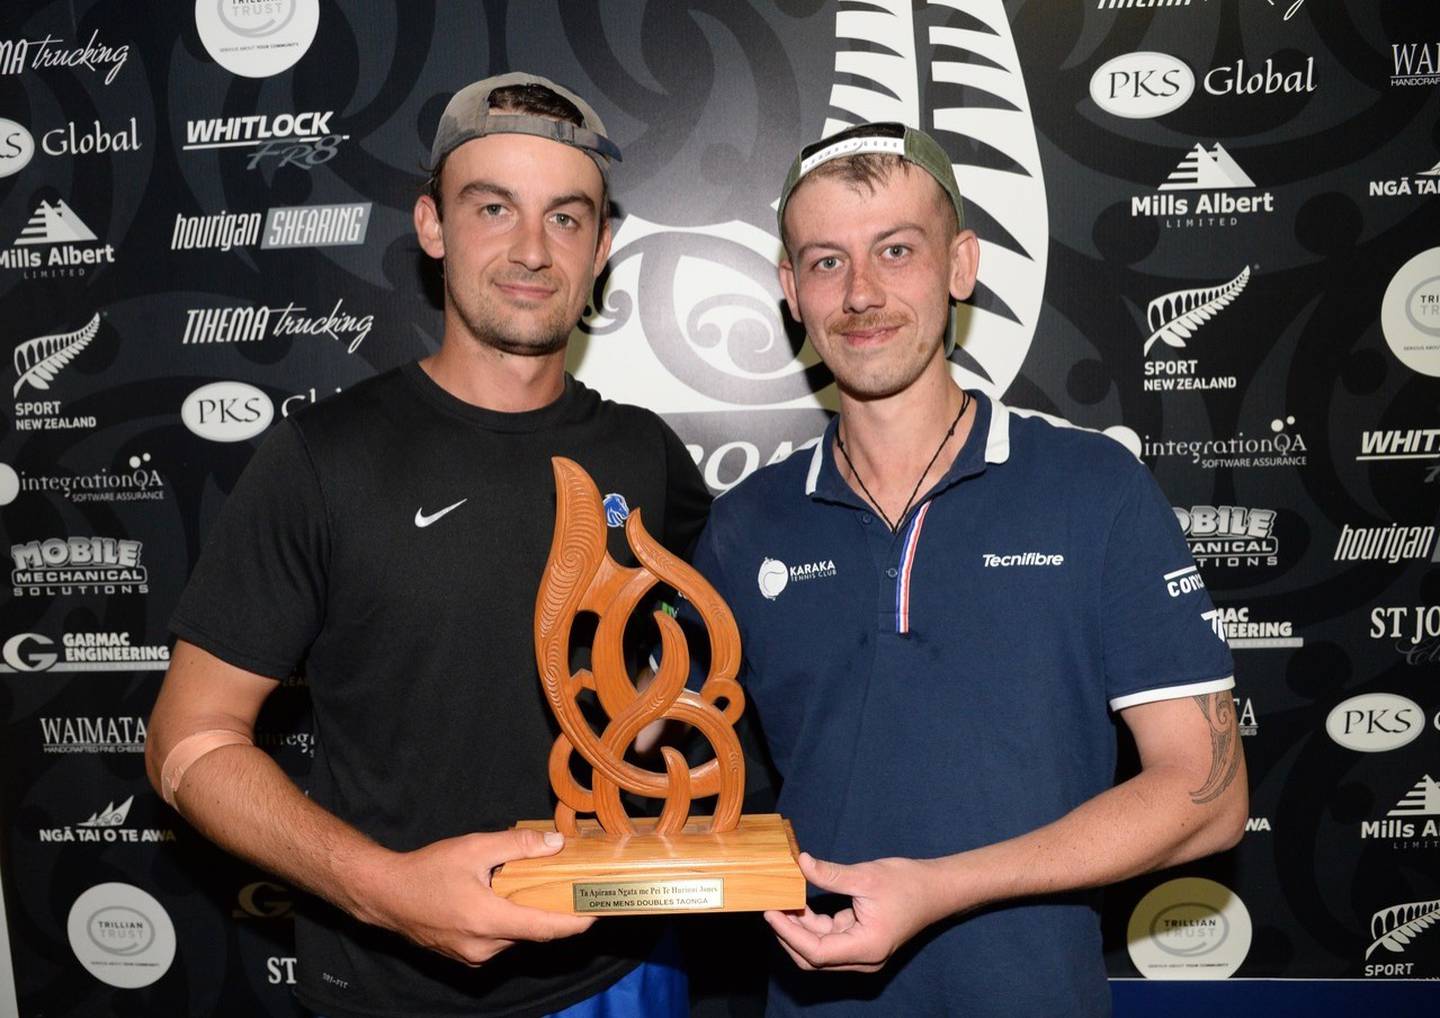 Whanganui brothers Kyle and Sam Butters claimed the men's doubles title at the Aotearoa Māori Tennis Championships this week. Kyle also the men's singles title for the seventh time and the mixed doubles for the fourth with sister Paris Butters. Photo / Supplied